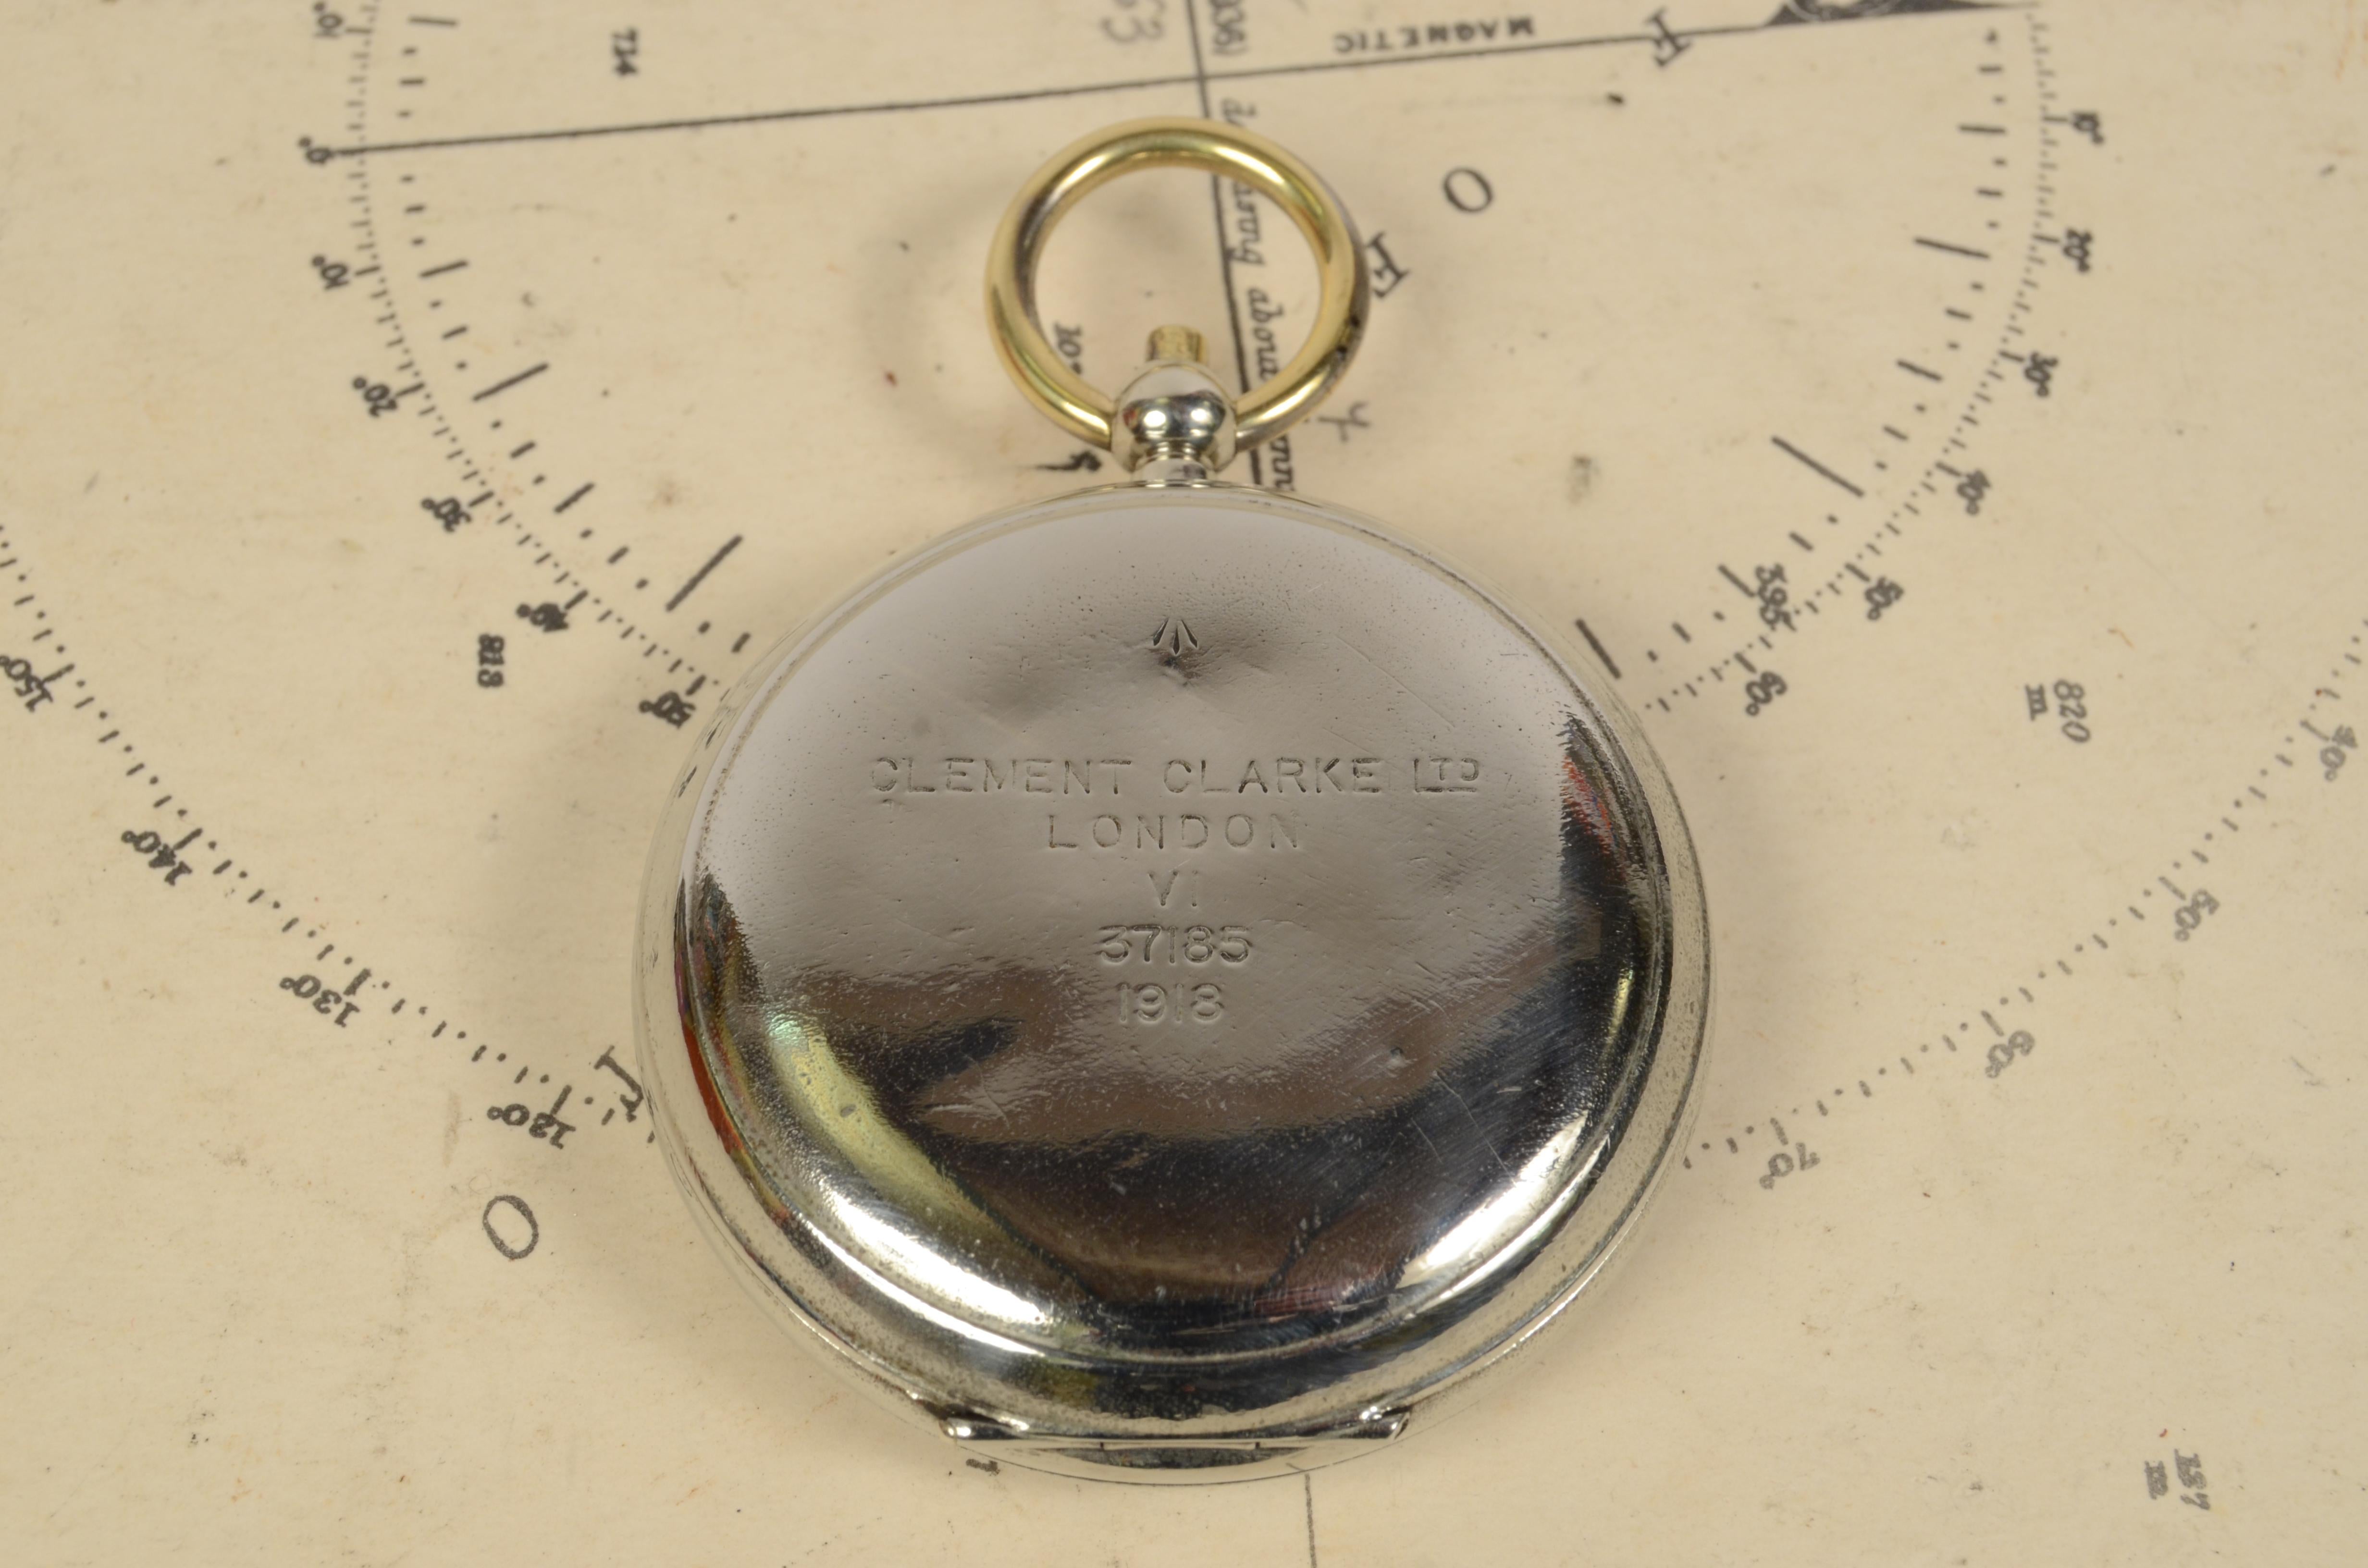 Early 20th Century Officer Pocket Aviation Compass Used in 1918 Signed Clement Clarke Ltd London